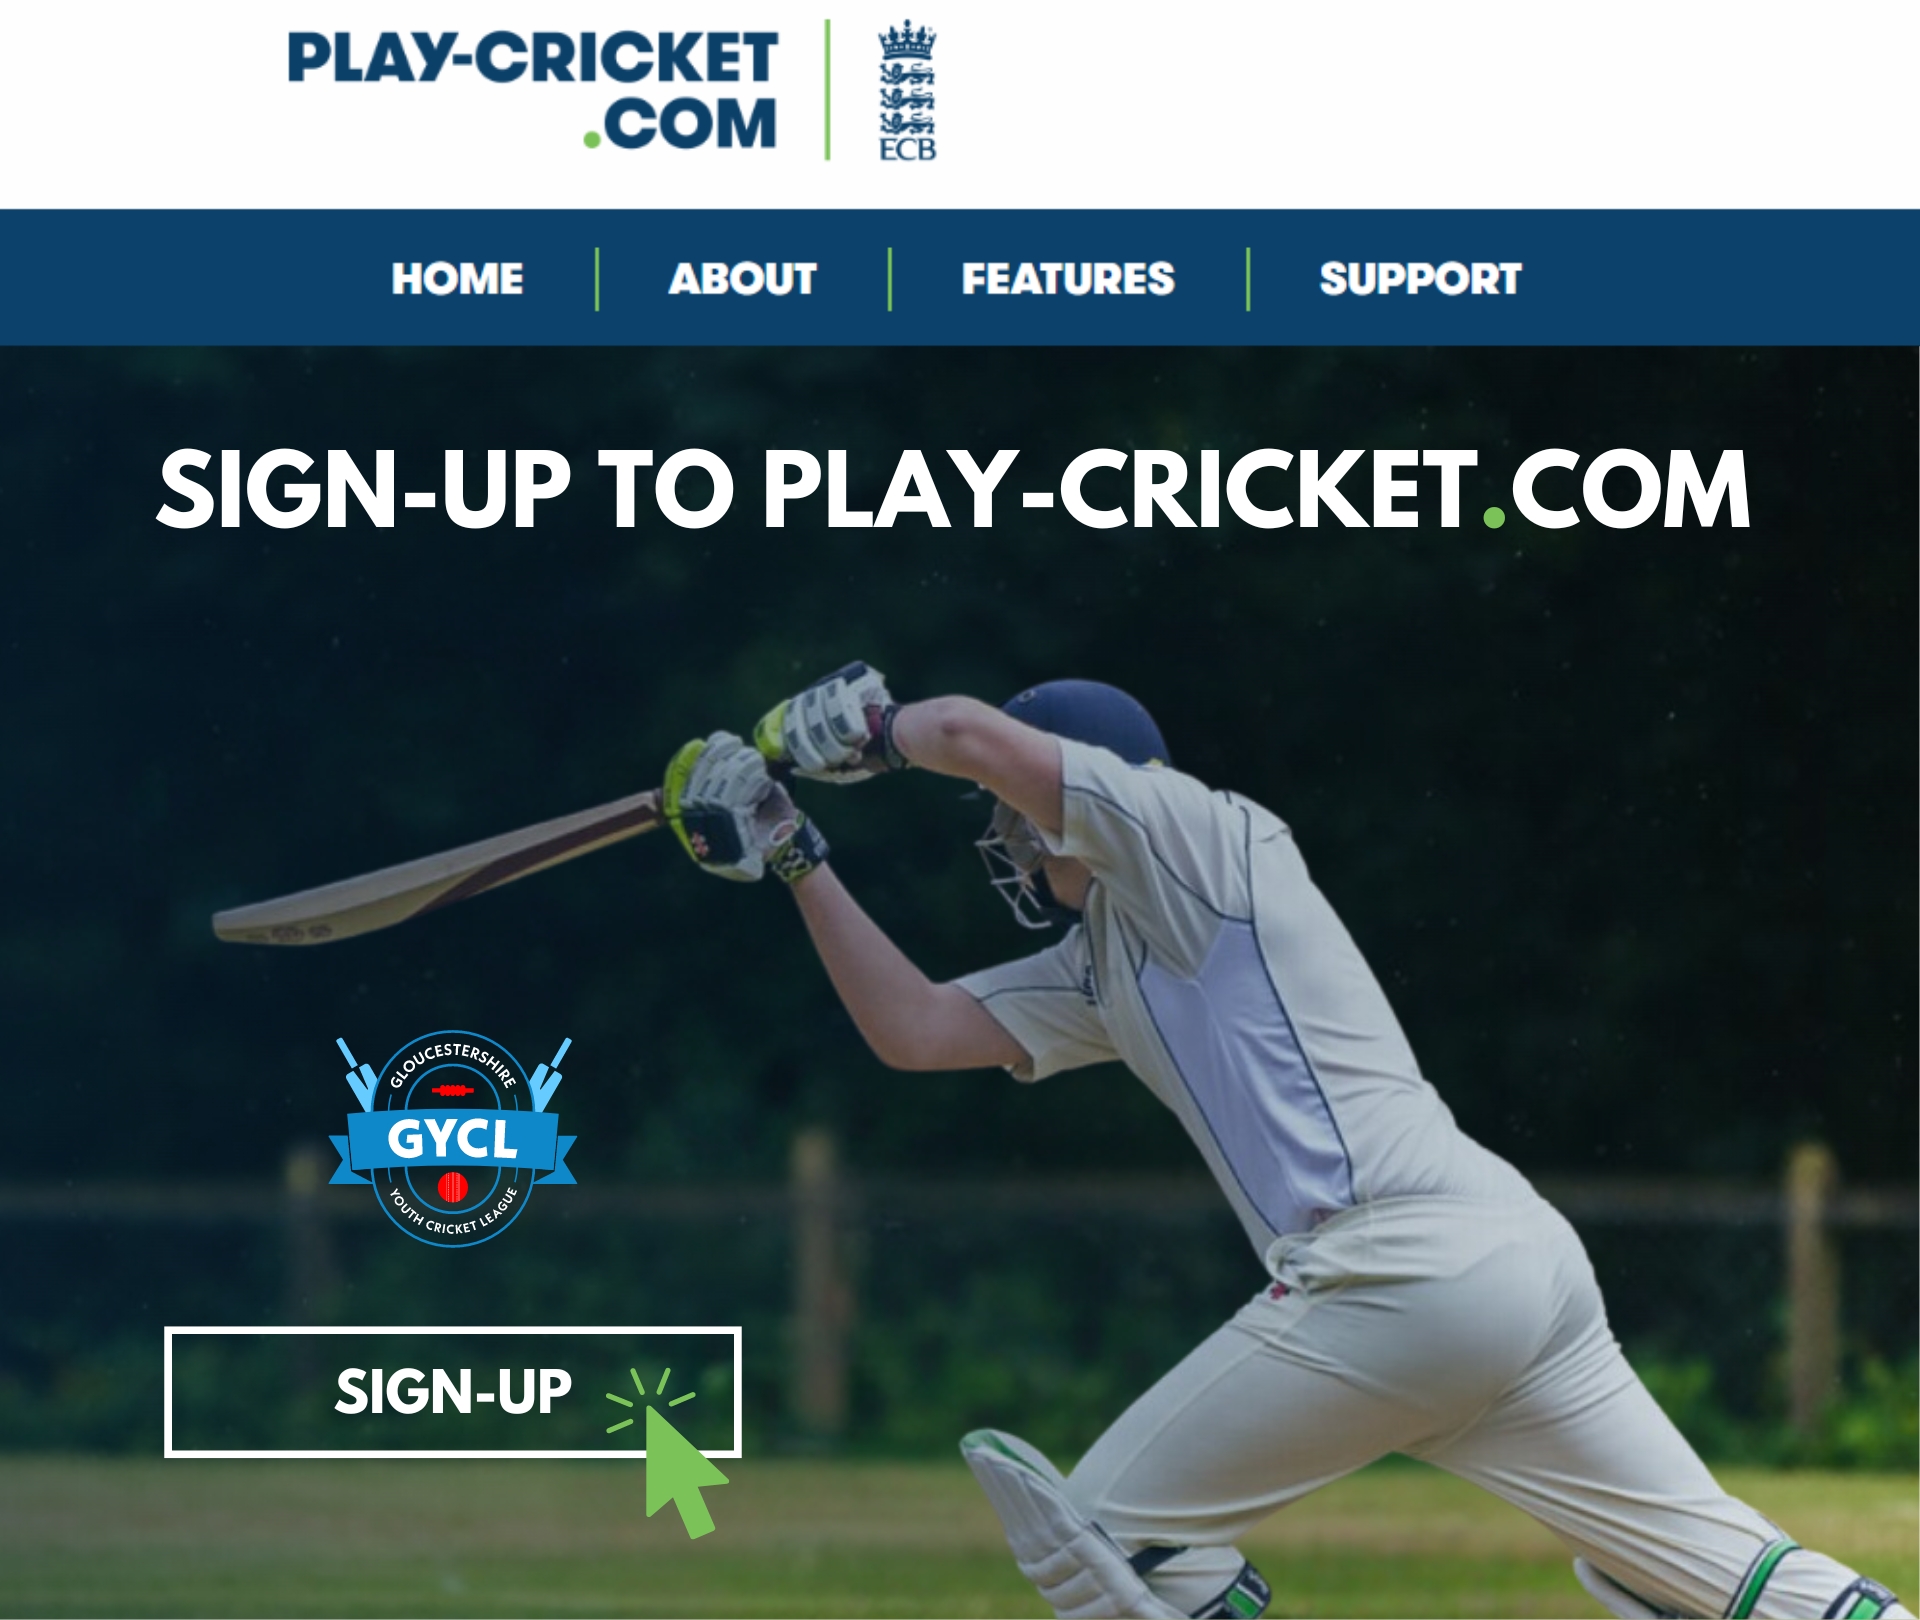 Sign up to Play-Cricket.com for GYCL